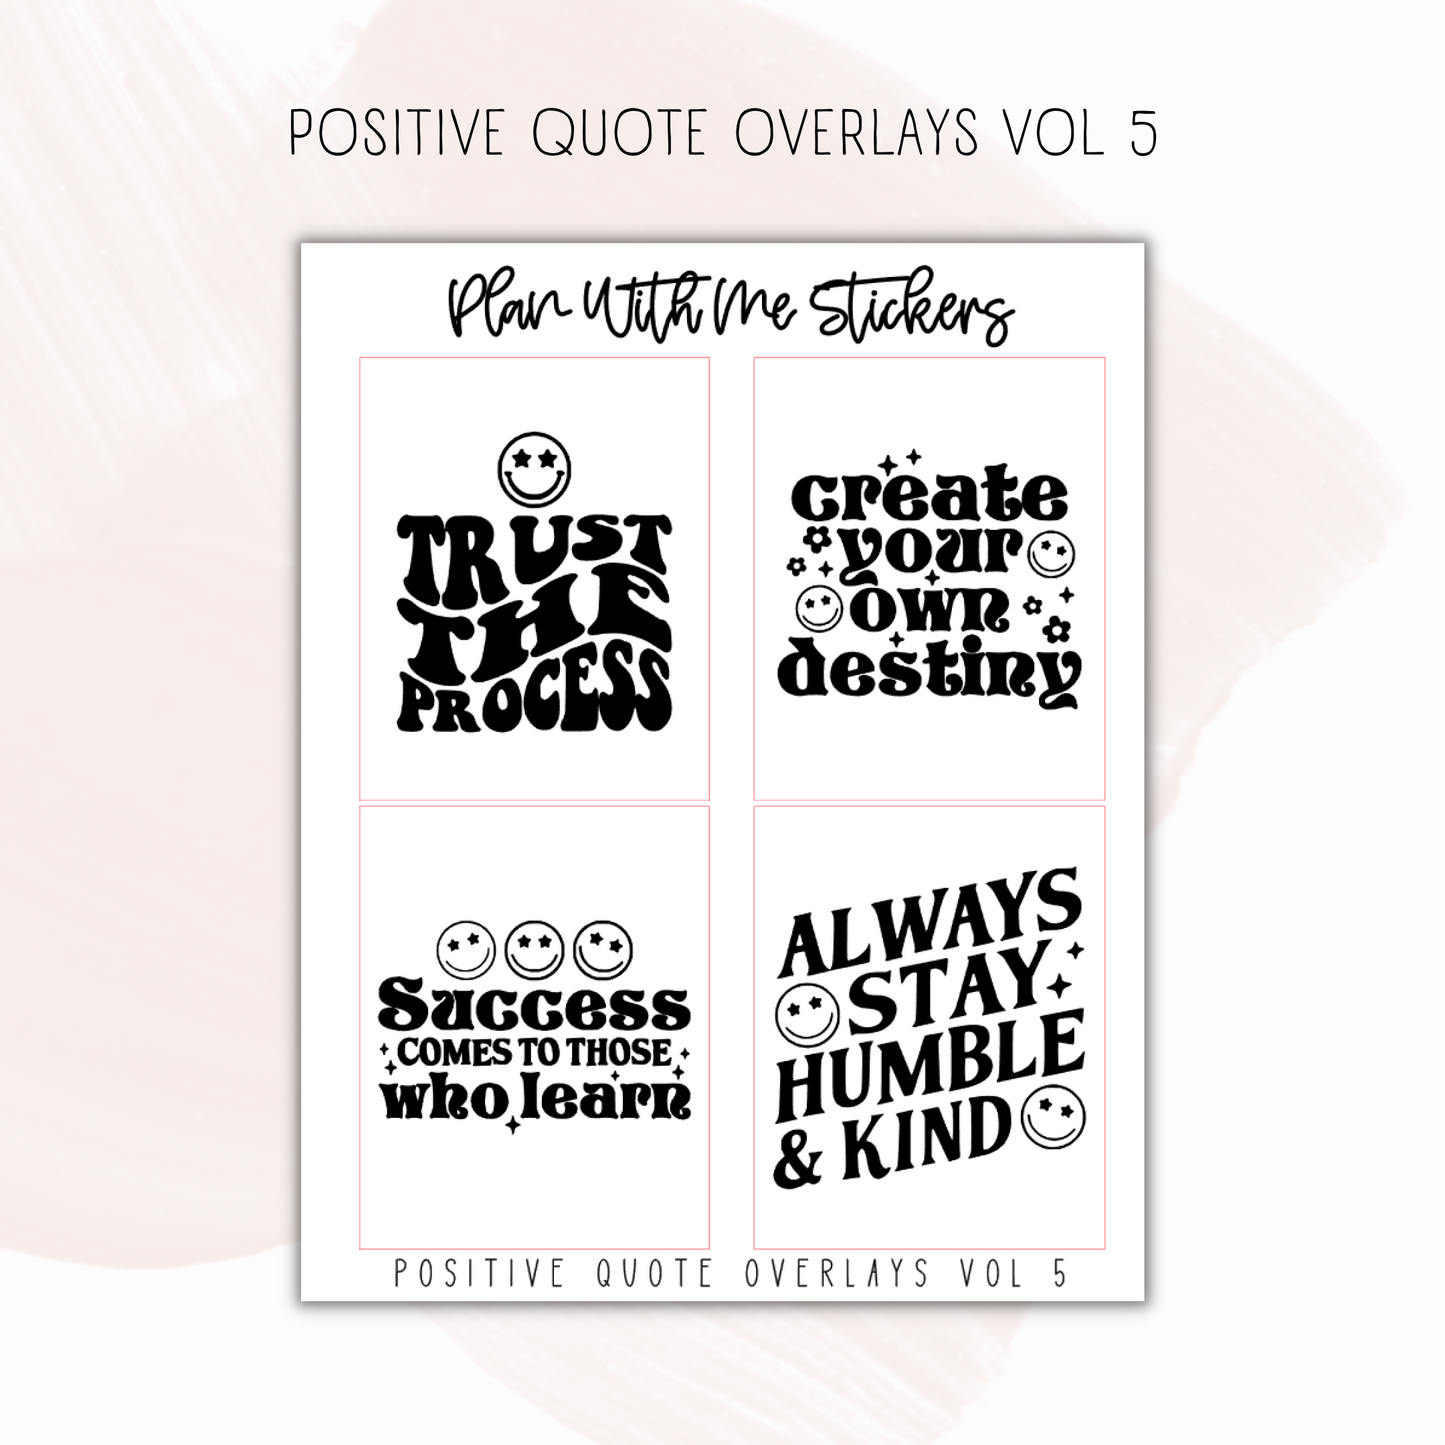 Positive Quote Overlays Vol 5